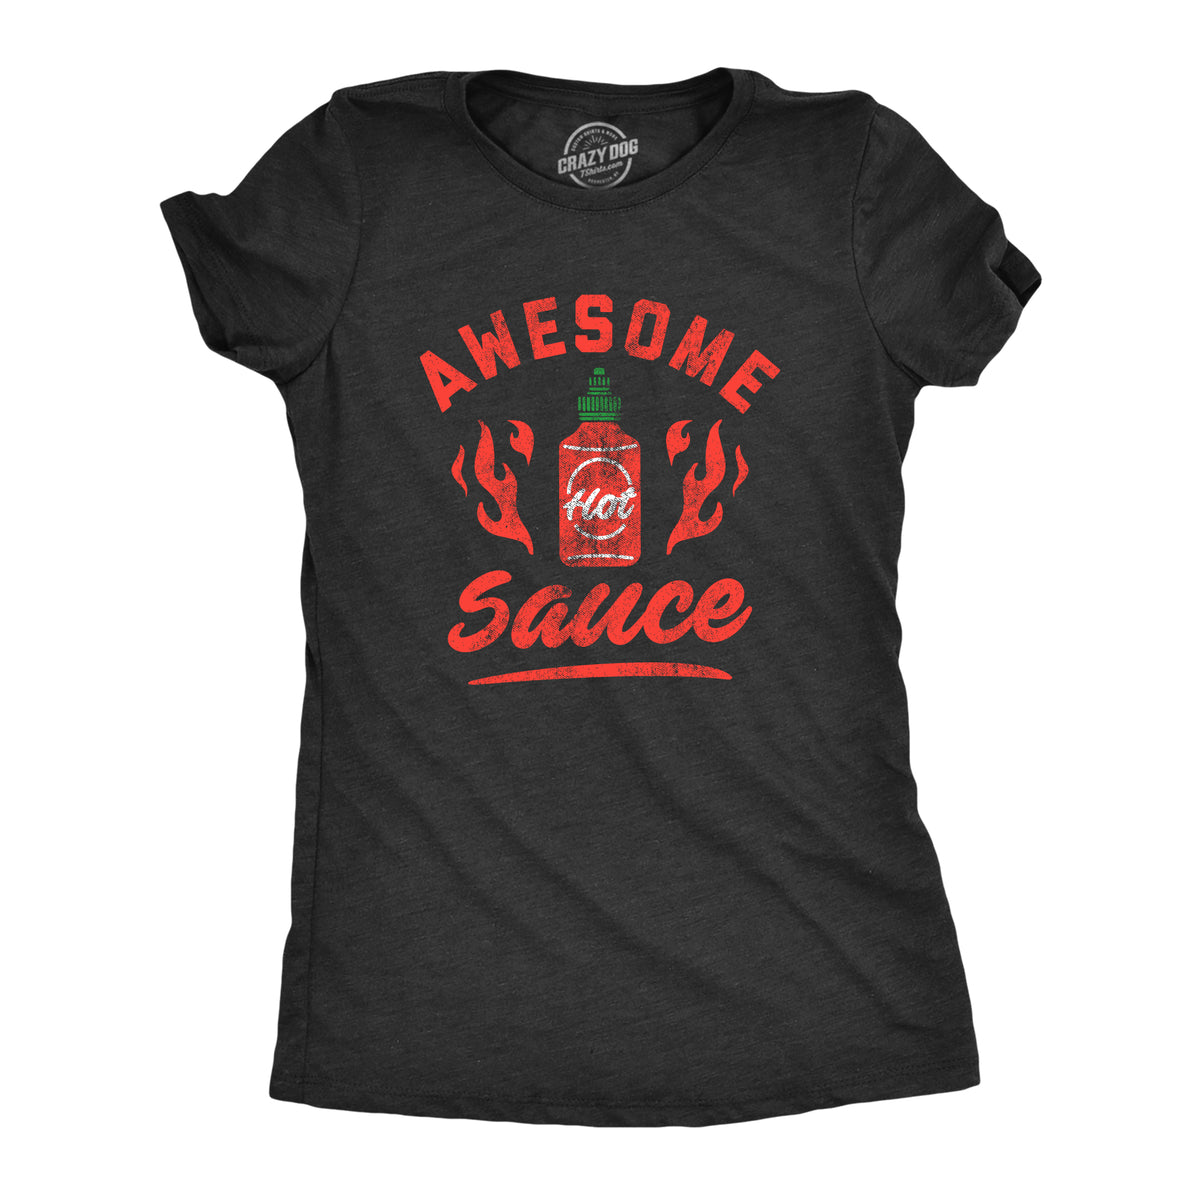 Funny Heather Black Awesome Sauce Womens T Shirt Nerdy Food Sarcastic Tee